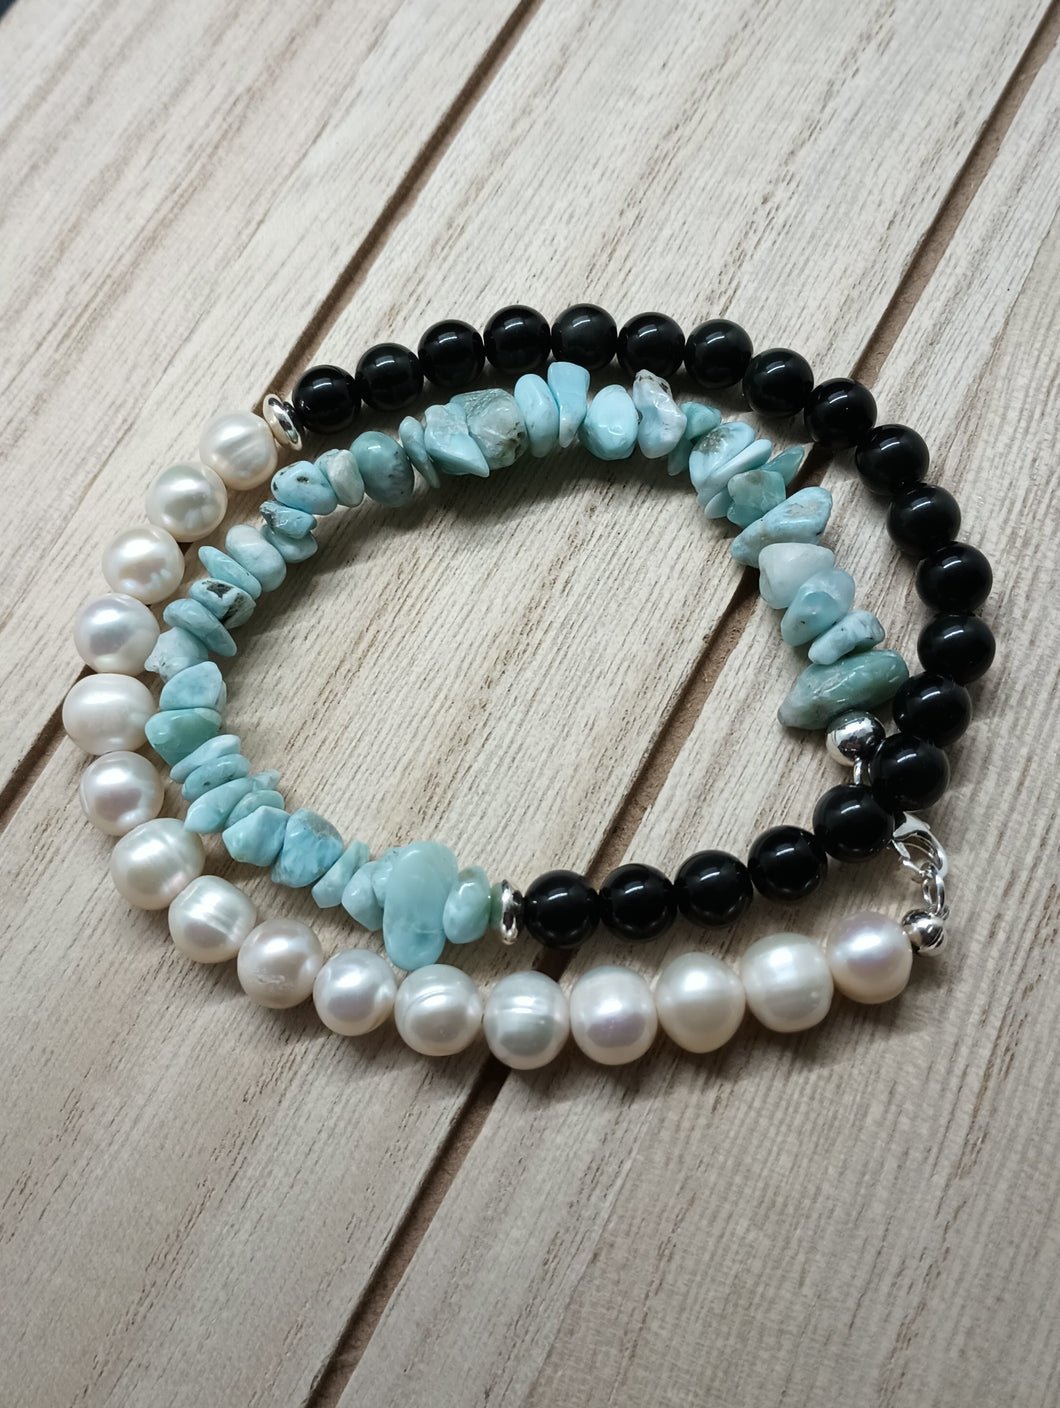 Black Iced Pearl and Larimar Wrapped Bracelet